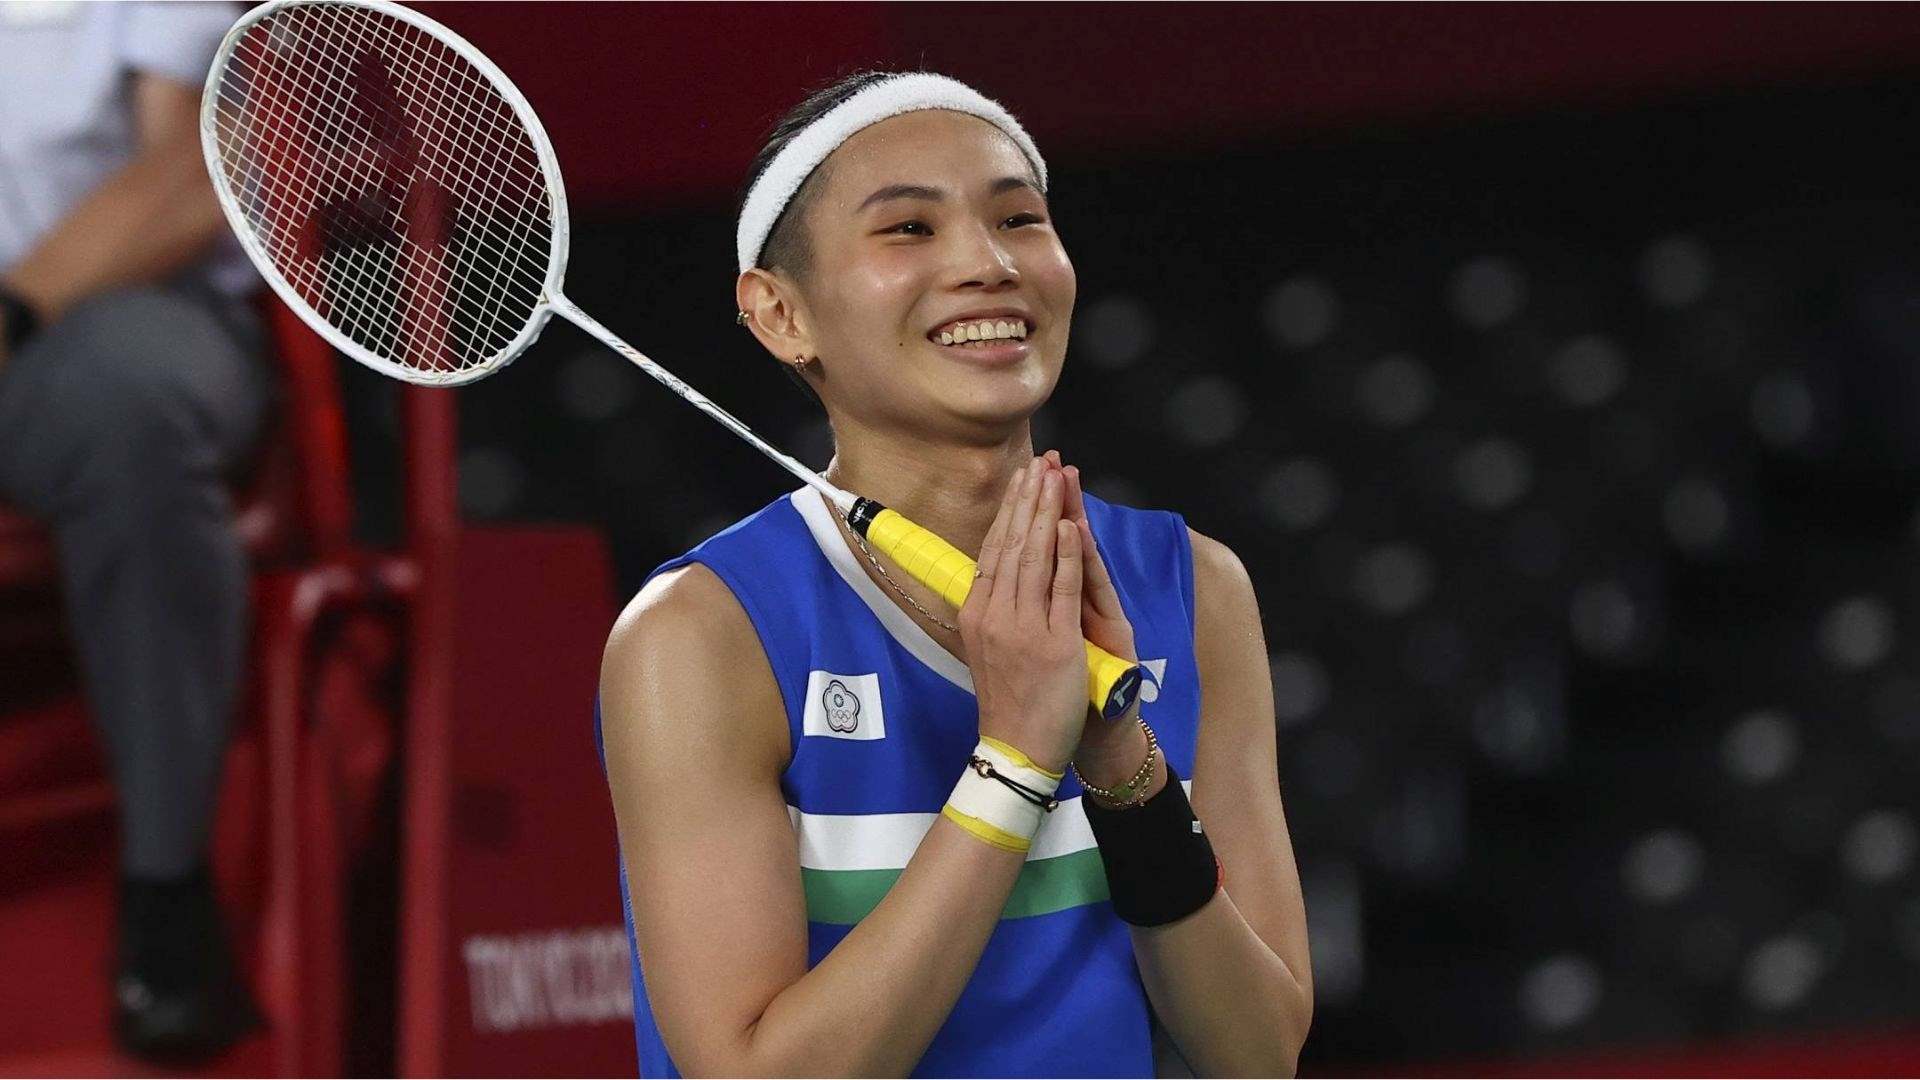 Tai Tzu-ying after her match (Image Credits - Twitter)